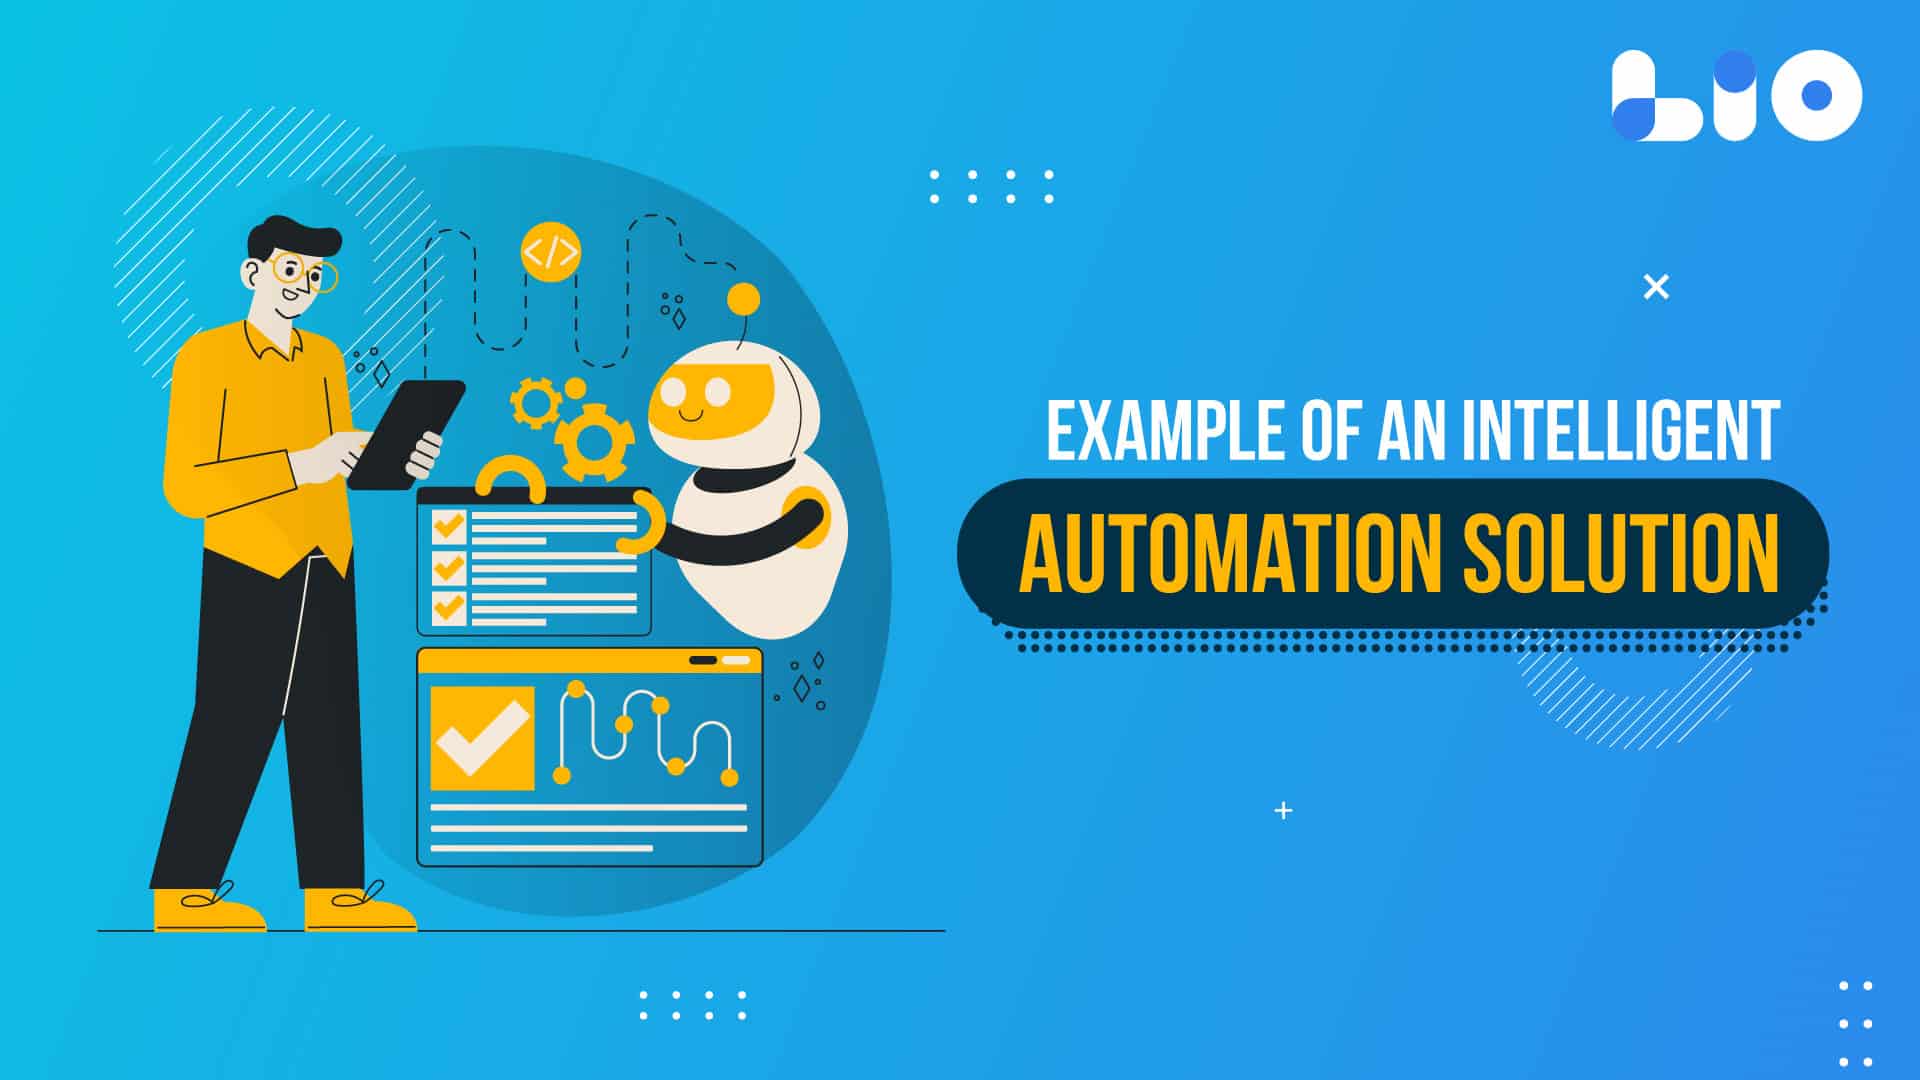 What is an Example of an Intelligent Automation Solution